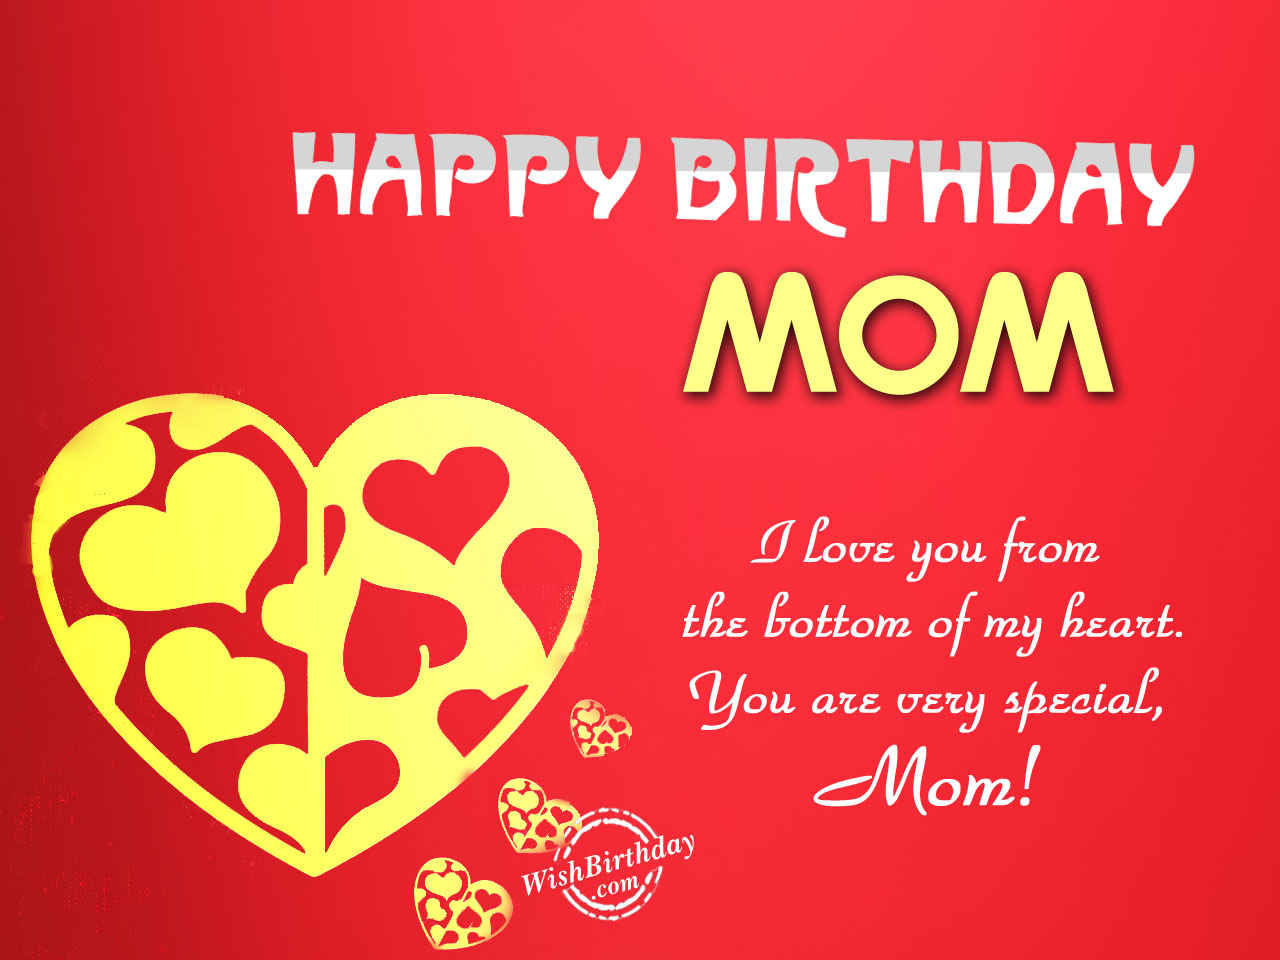 Happy Birthday To Your Mom Meaning In Urdu